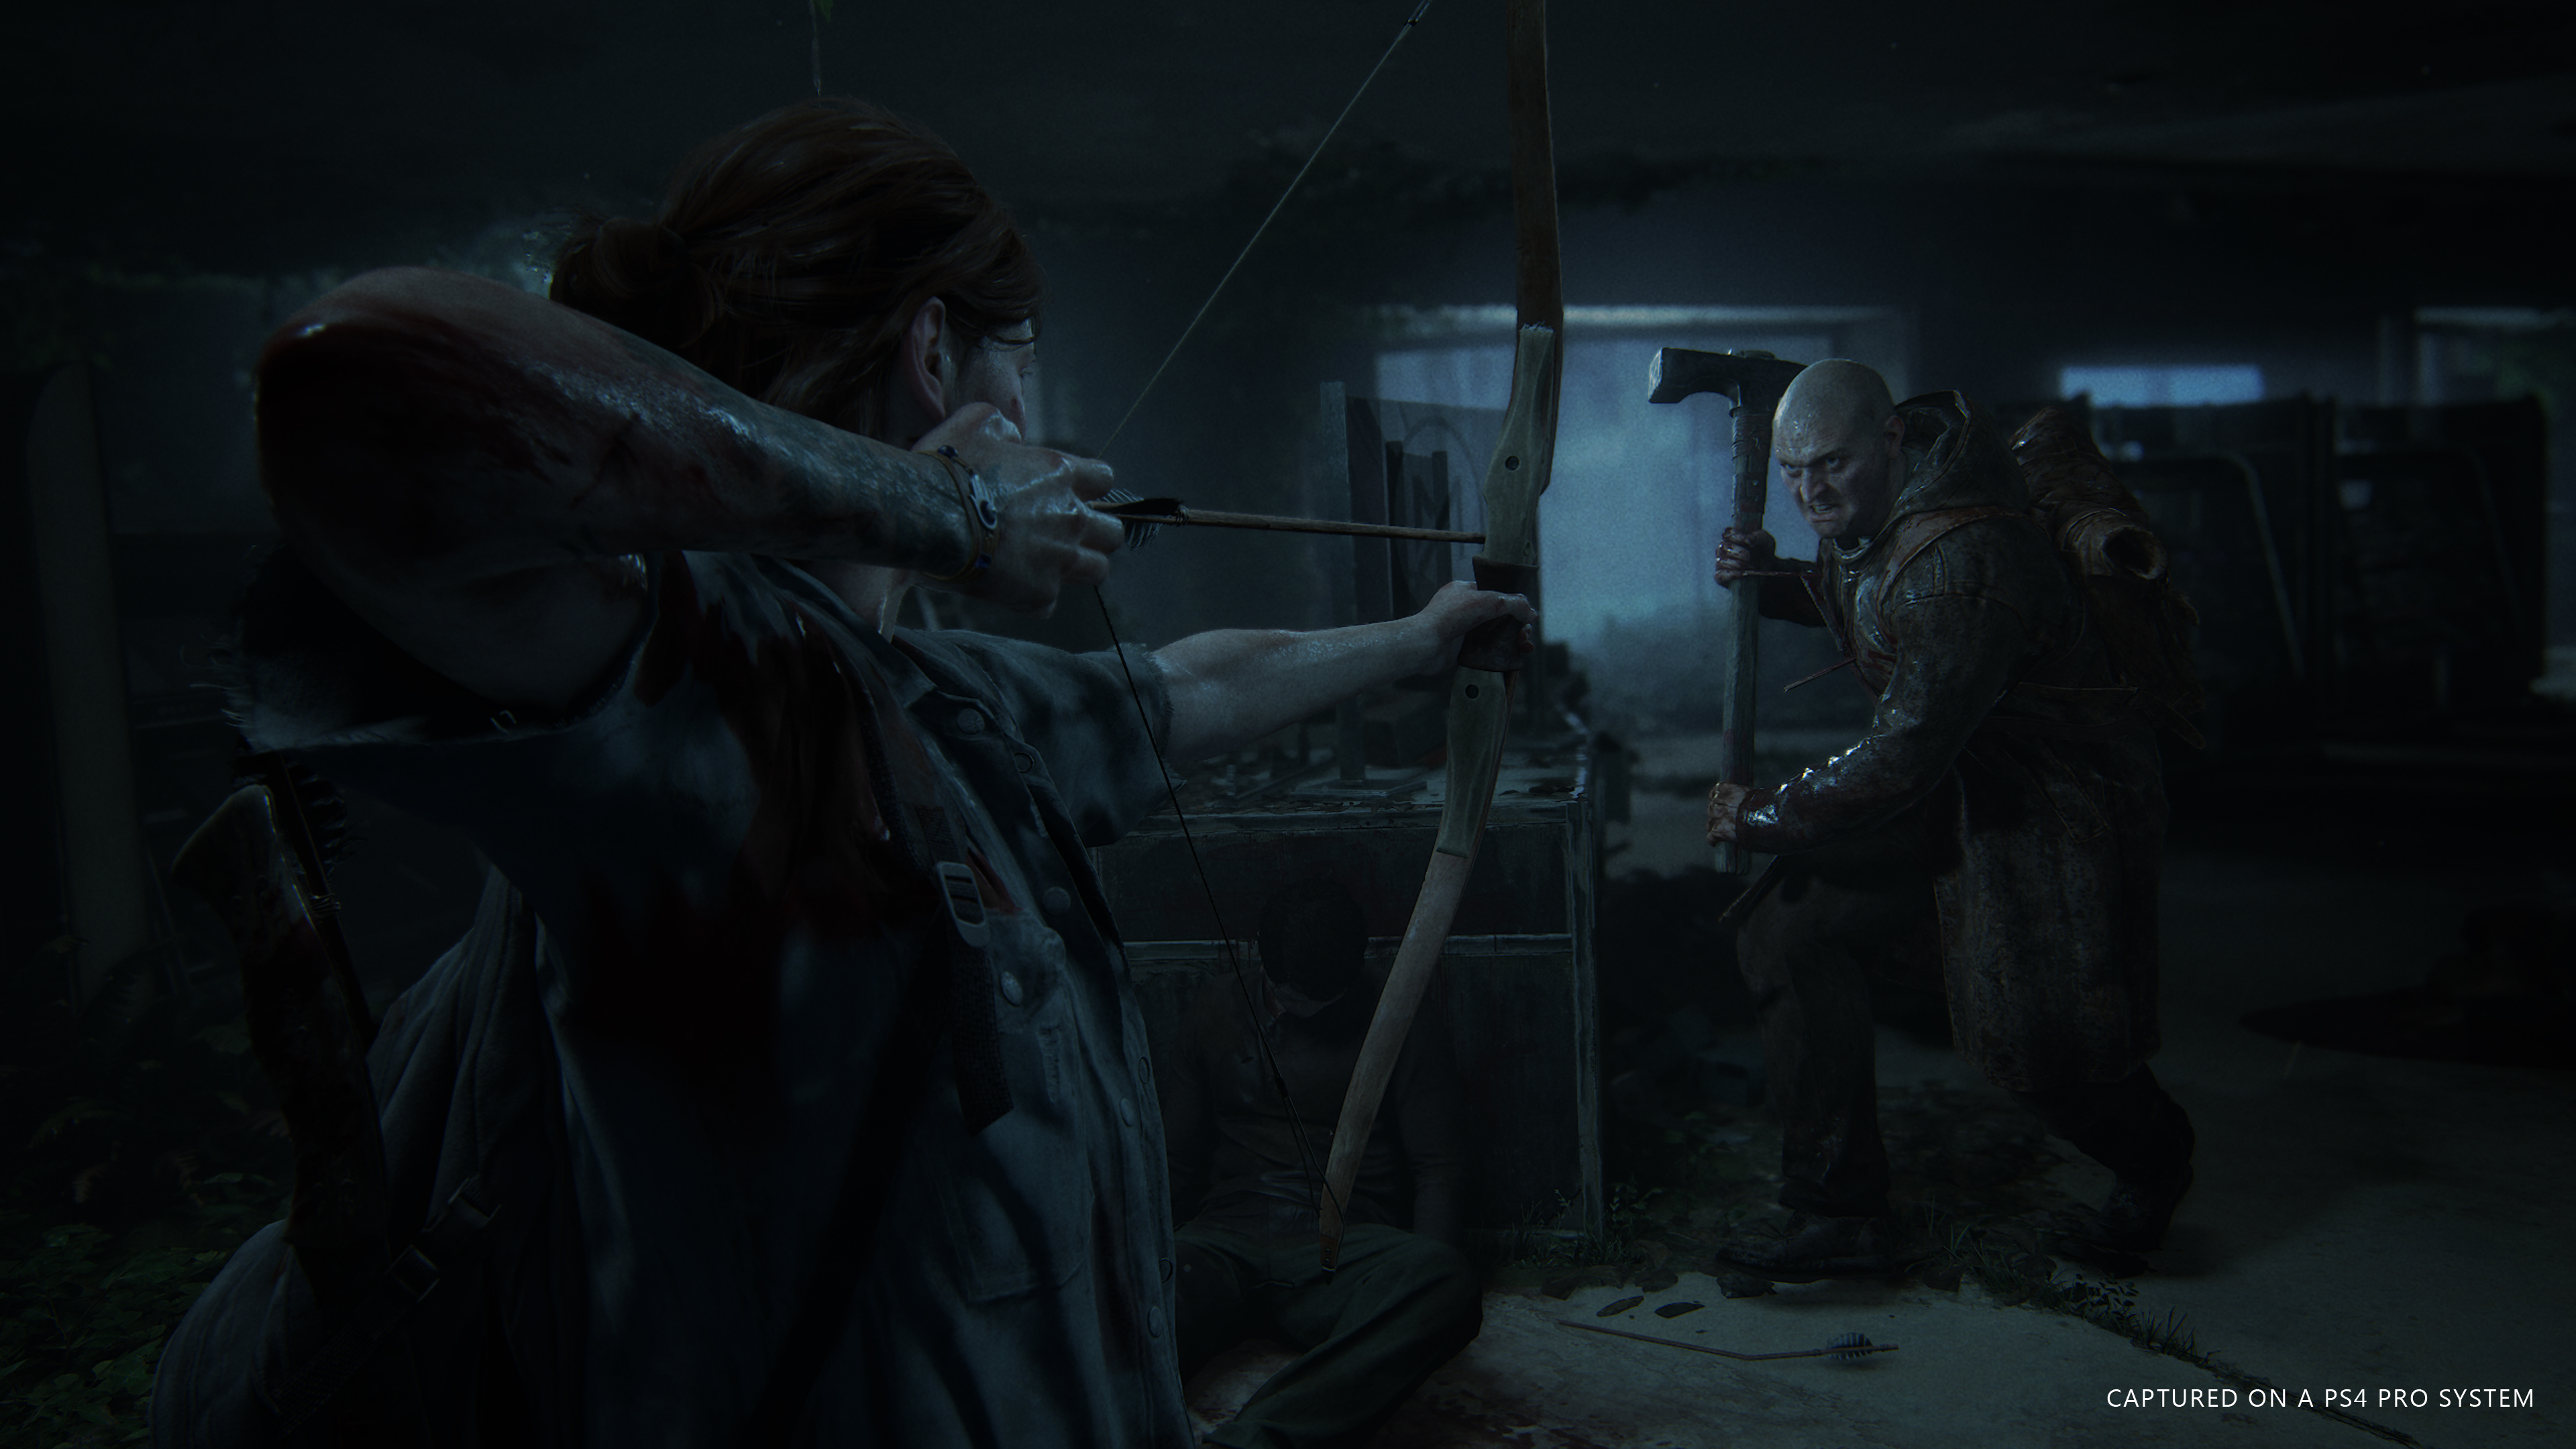 Celebrate Outbreak Day With New Theme Song, PS4 Theme, Avatars and More For  'The Last of Us Part II' - Bloody Disgusting